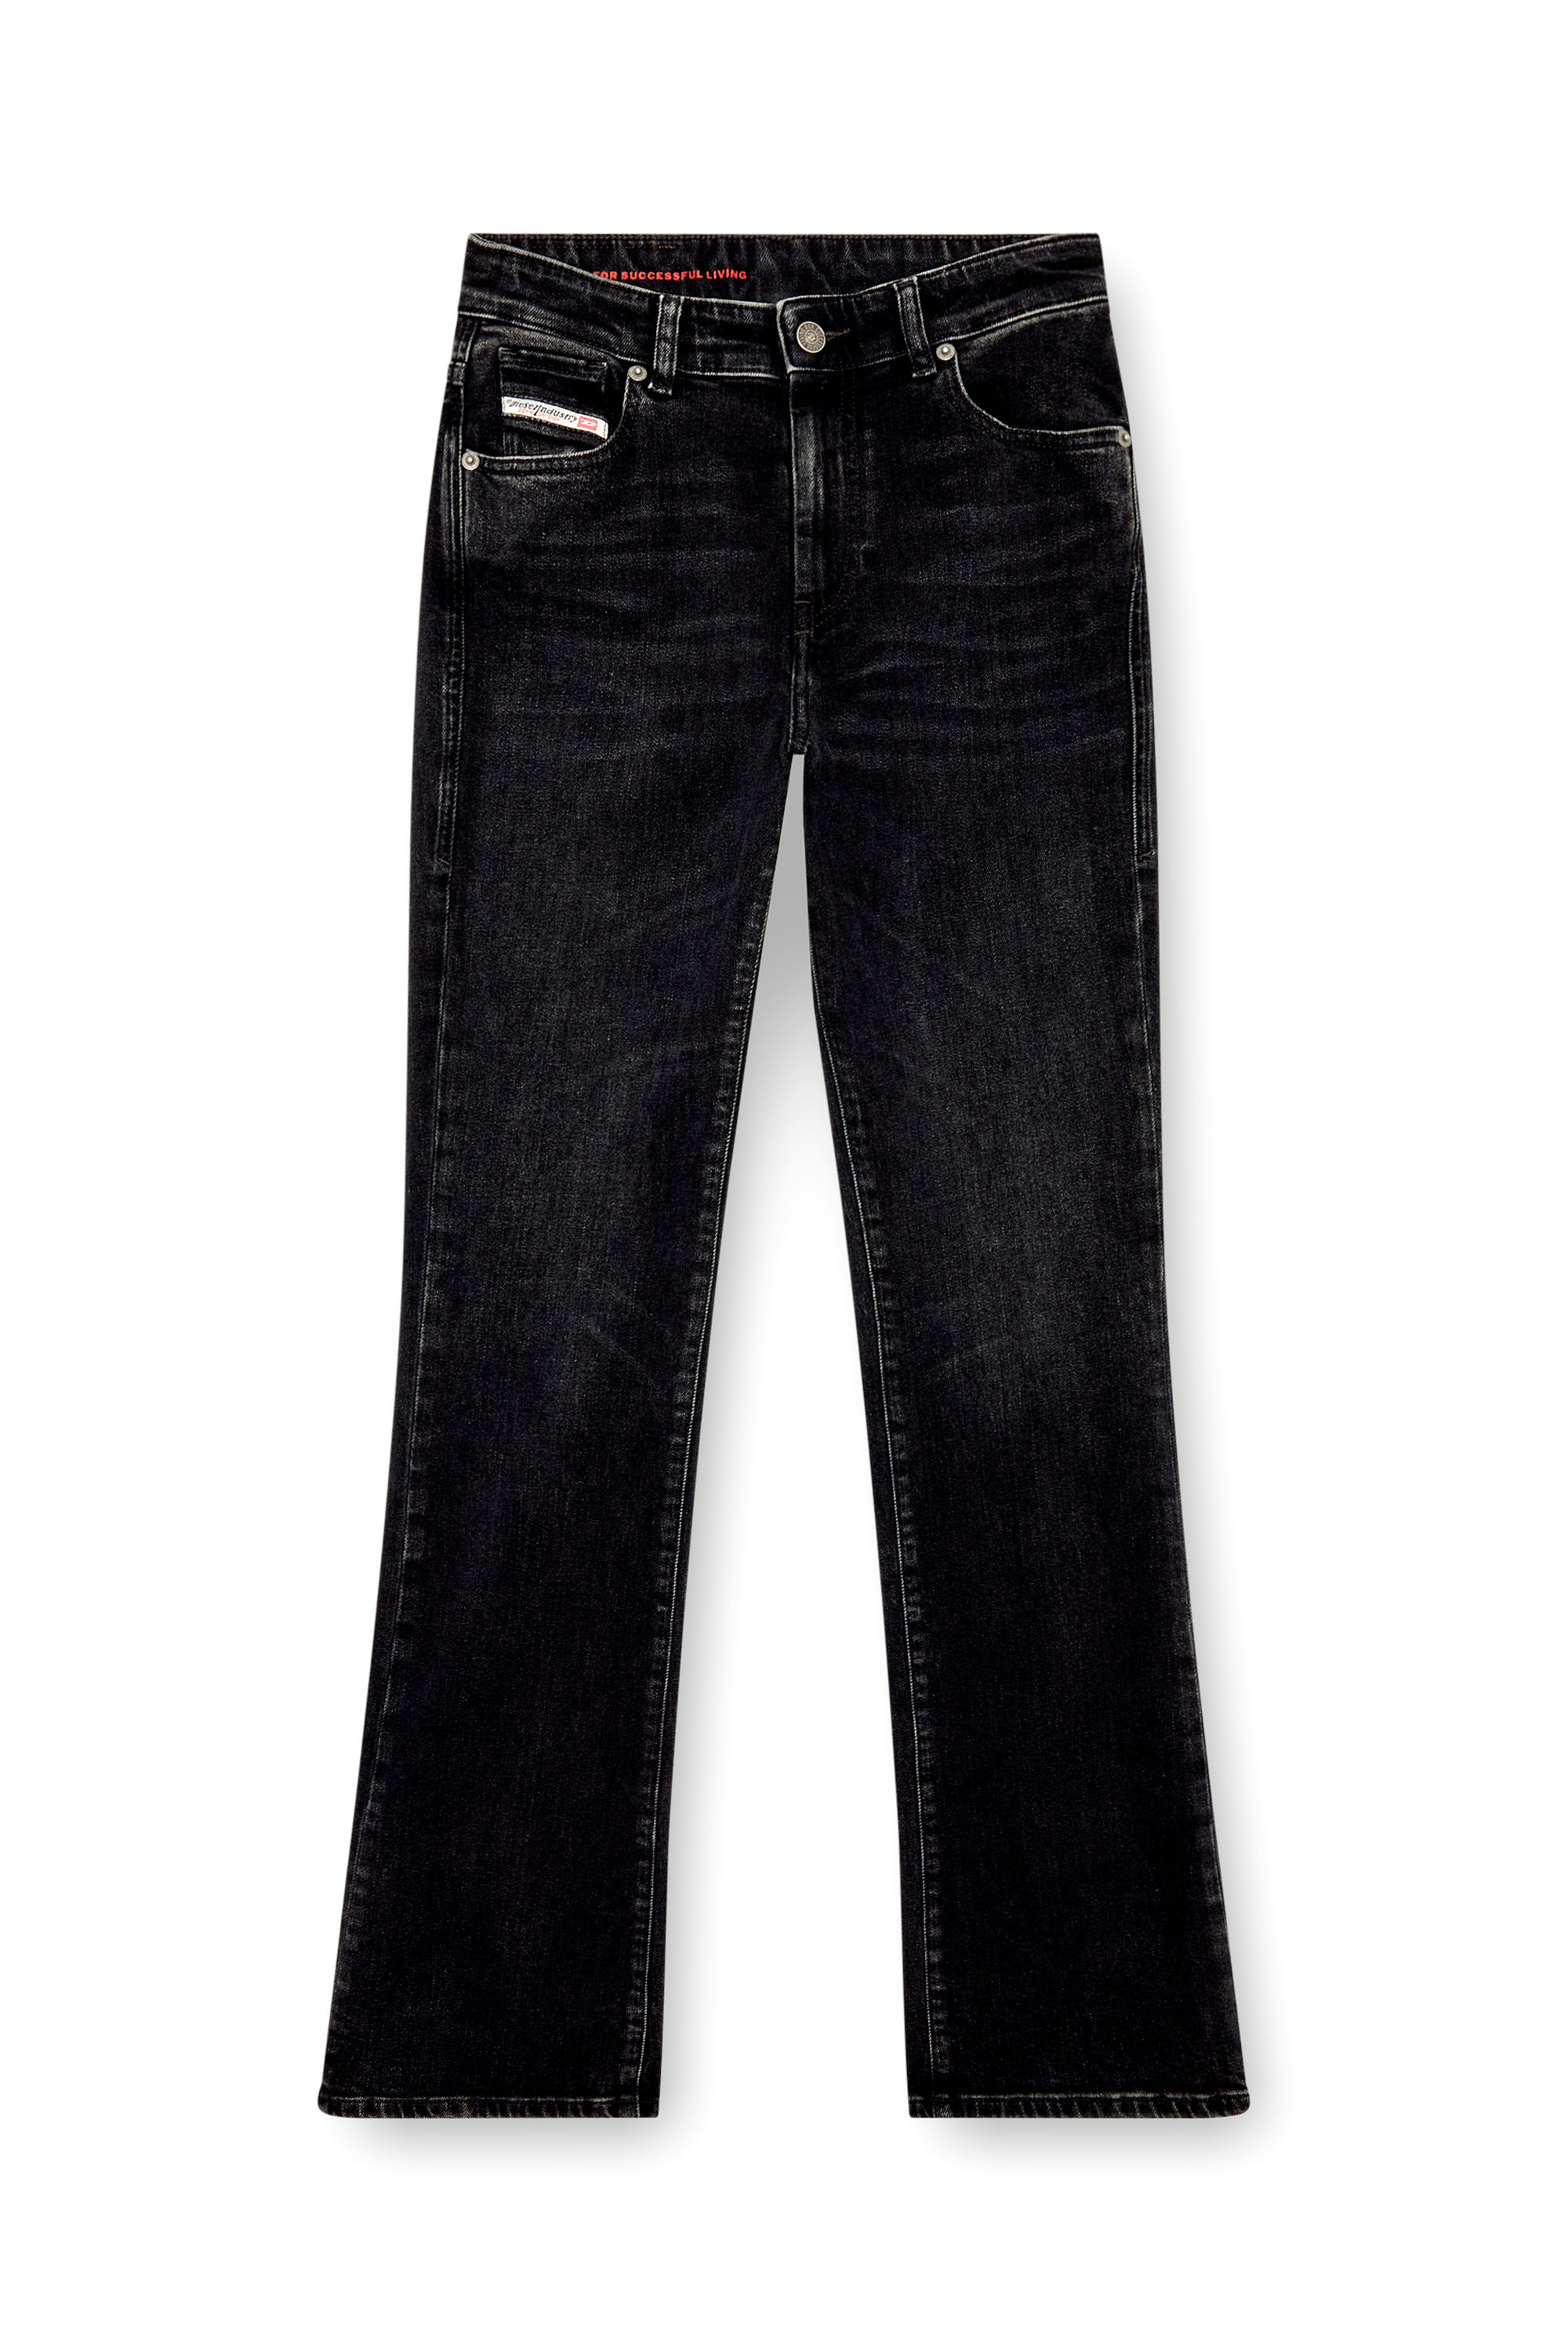 Diesel - Bootcut and Flare Jeans 2003 D-Escription 09I30, Mujer Bootcut y Flare Jeans - 2003 D-Escription in Negro - Image 3